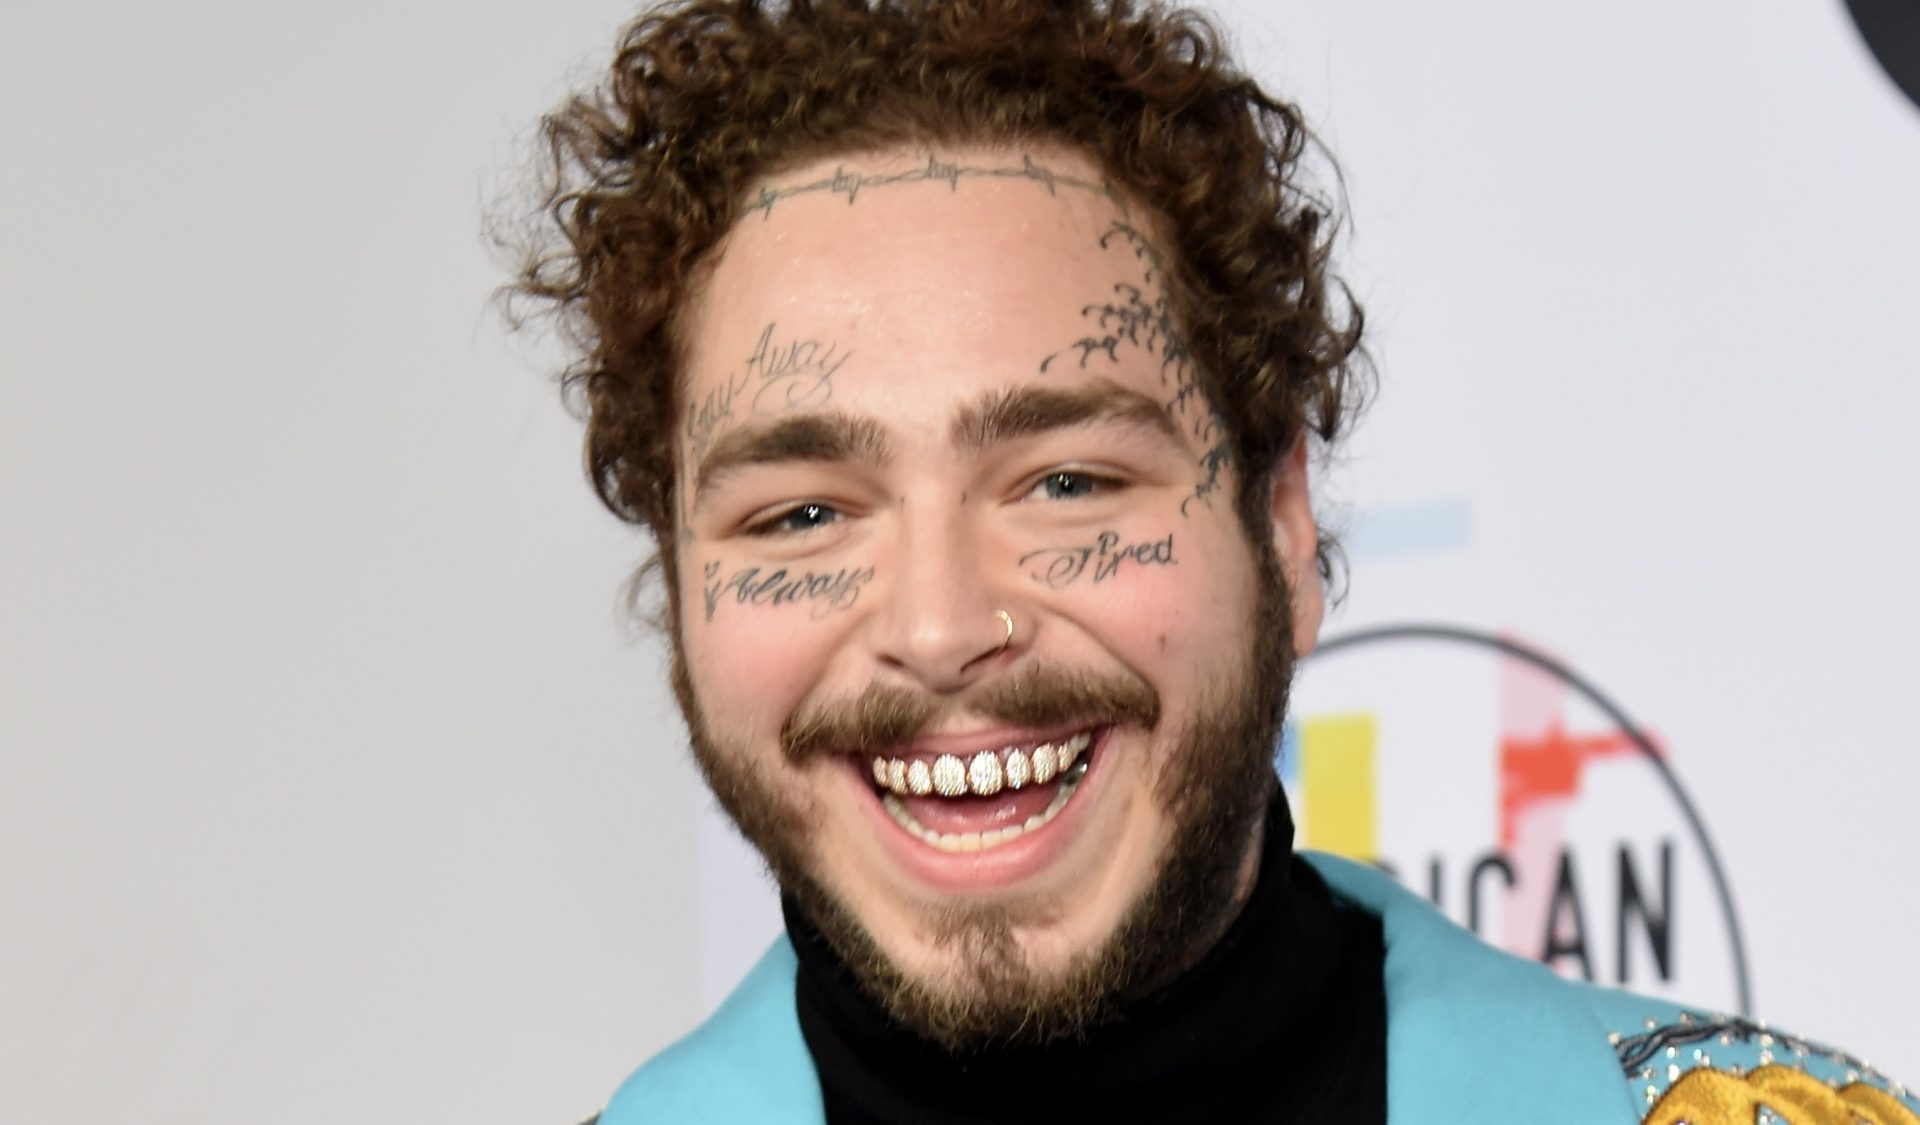 Post Malone Says He's 'Not Doing Drugs' In Wake Of Speculation